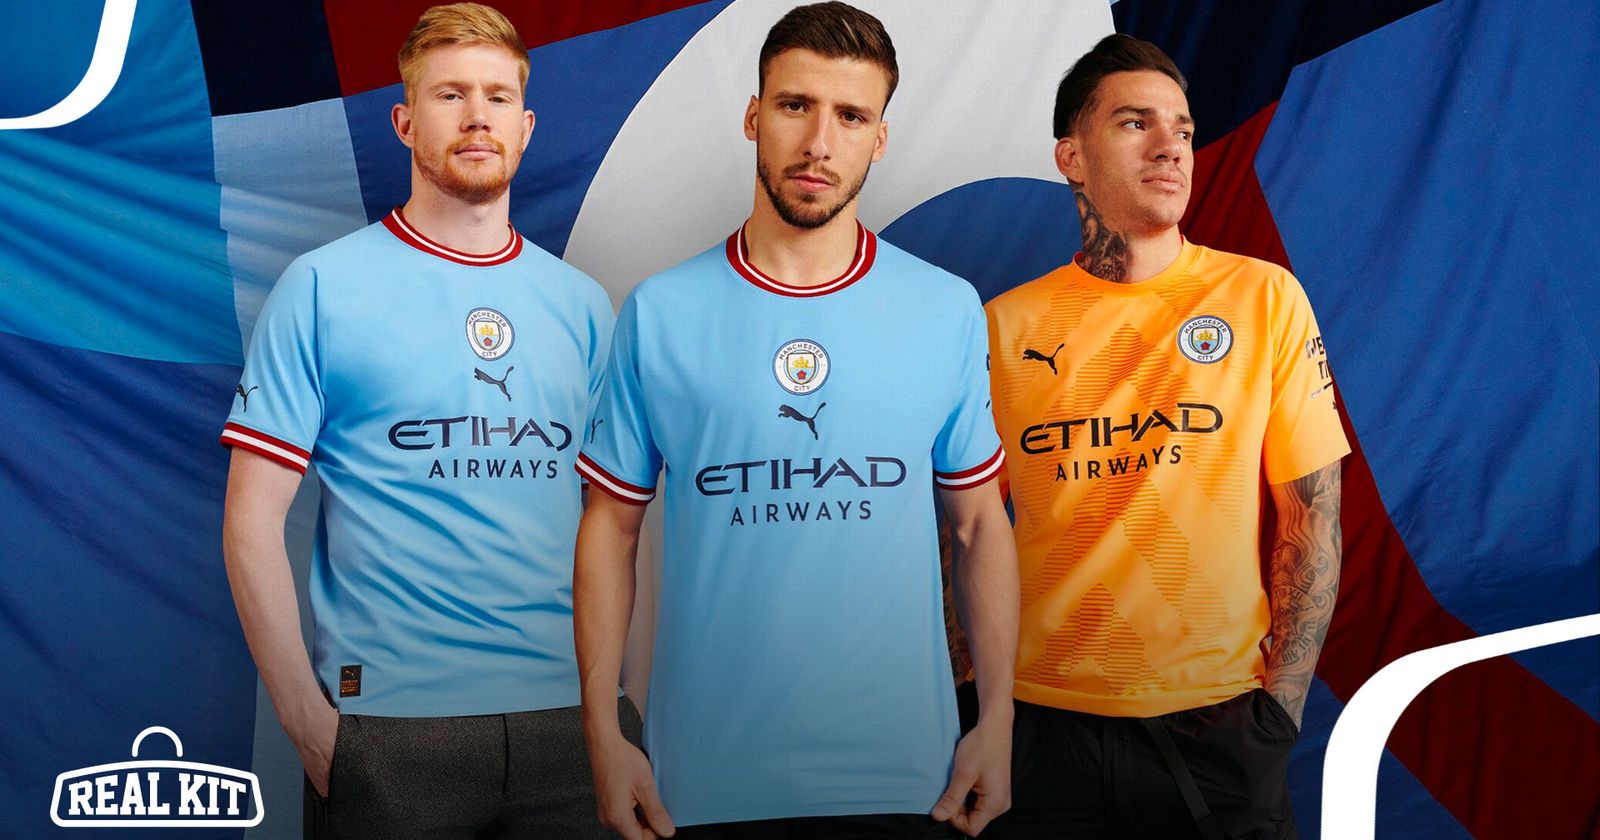  Manchester City: Official Man City Kits